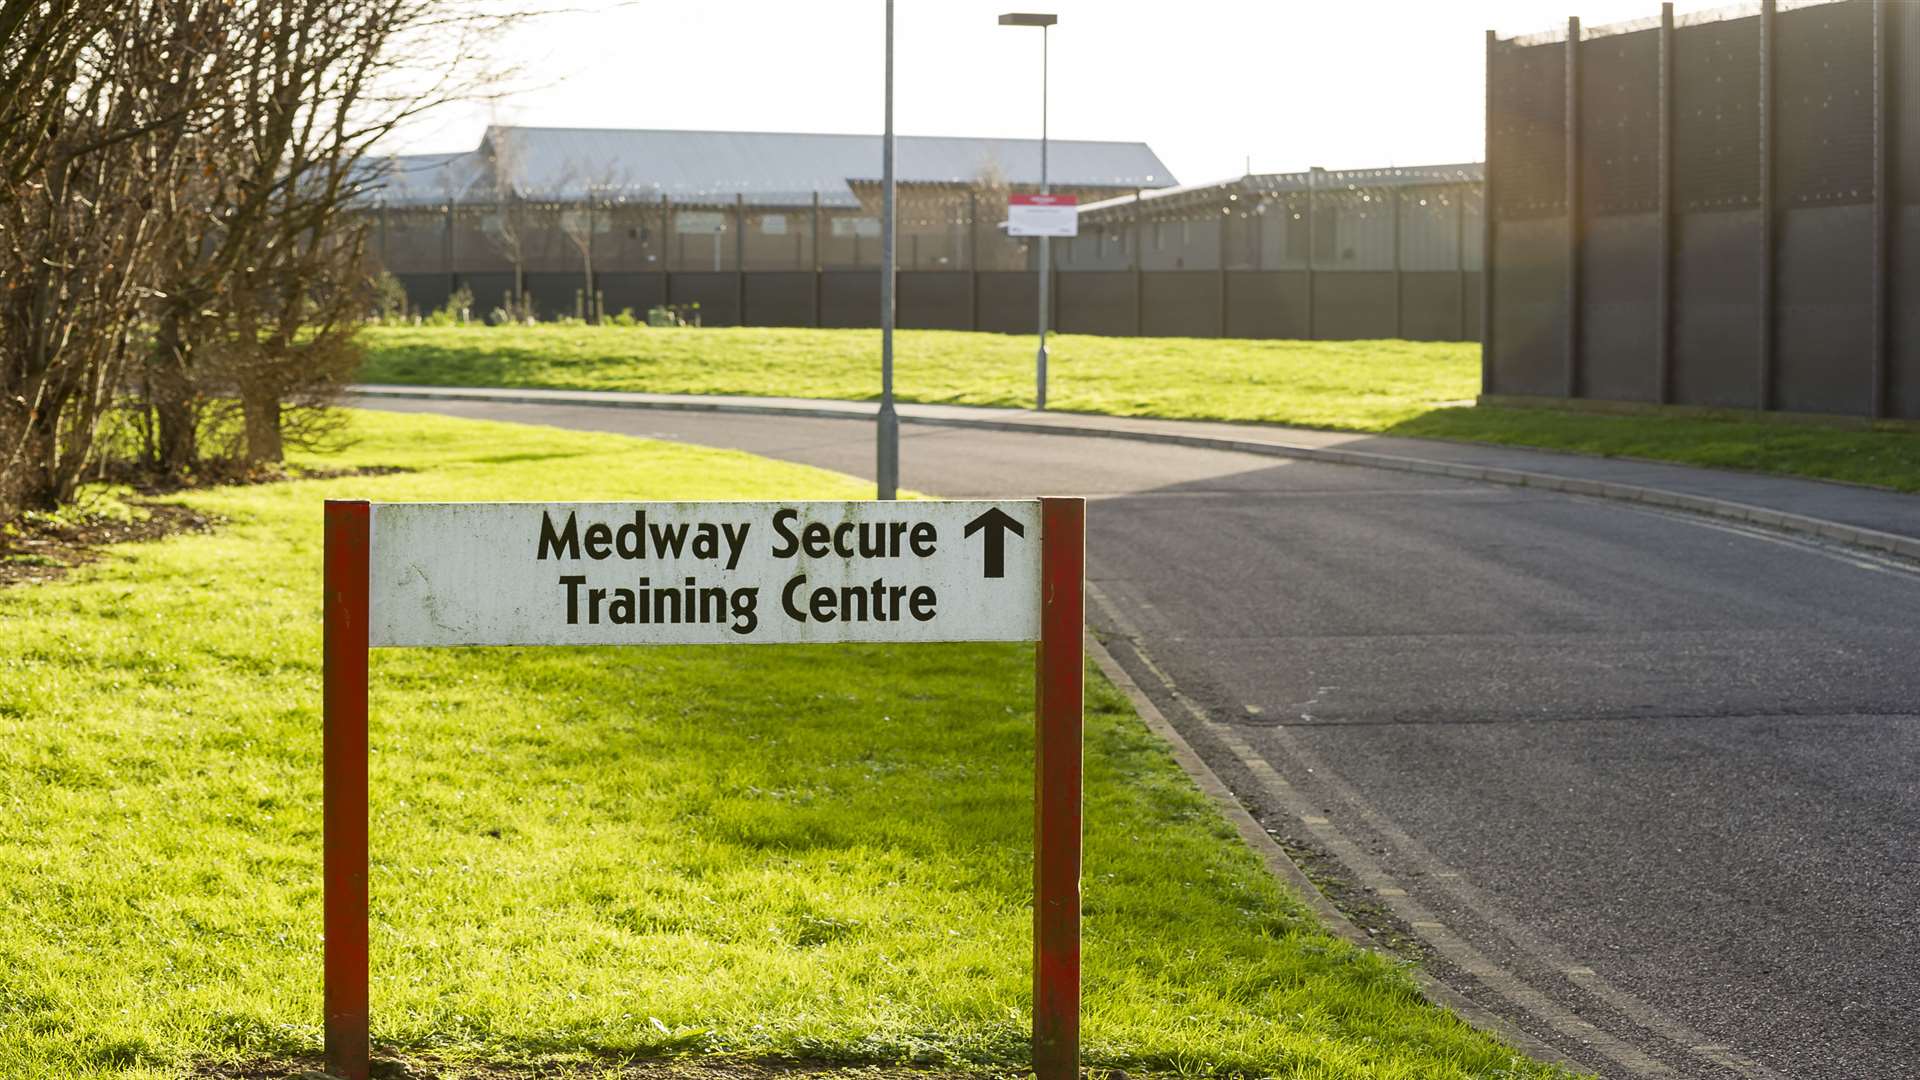 Medway Secure Training Centre.